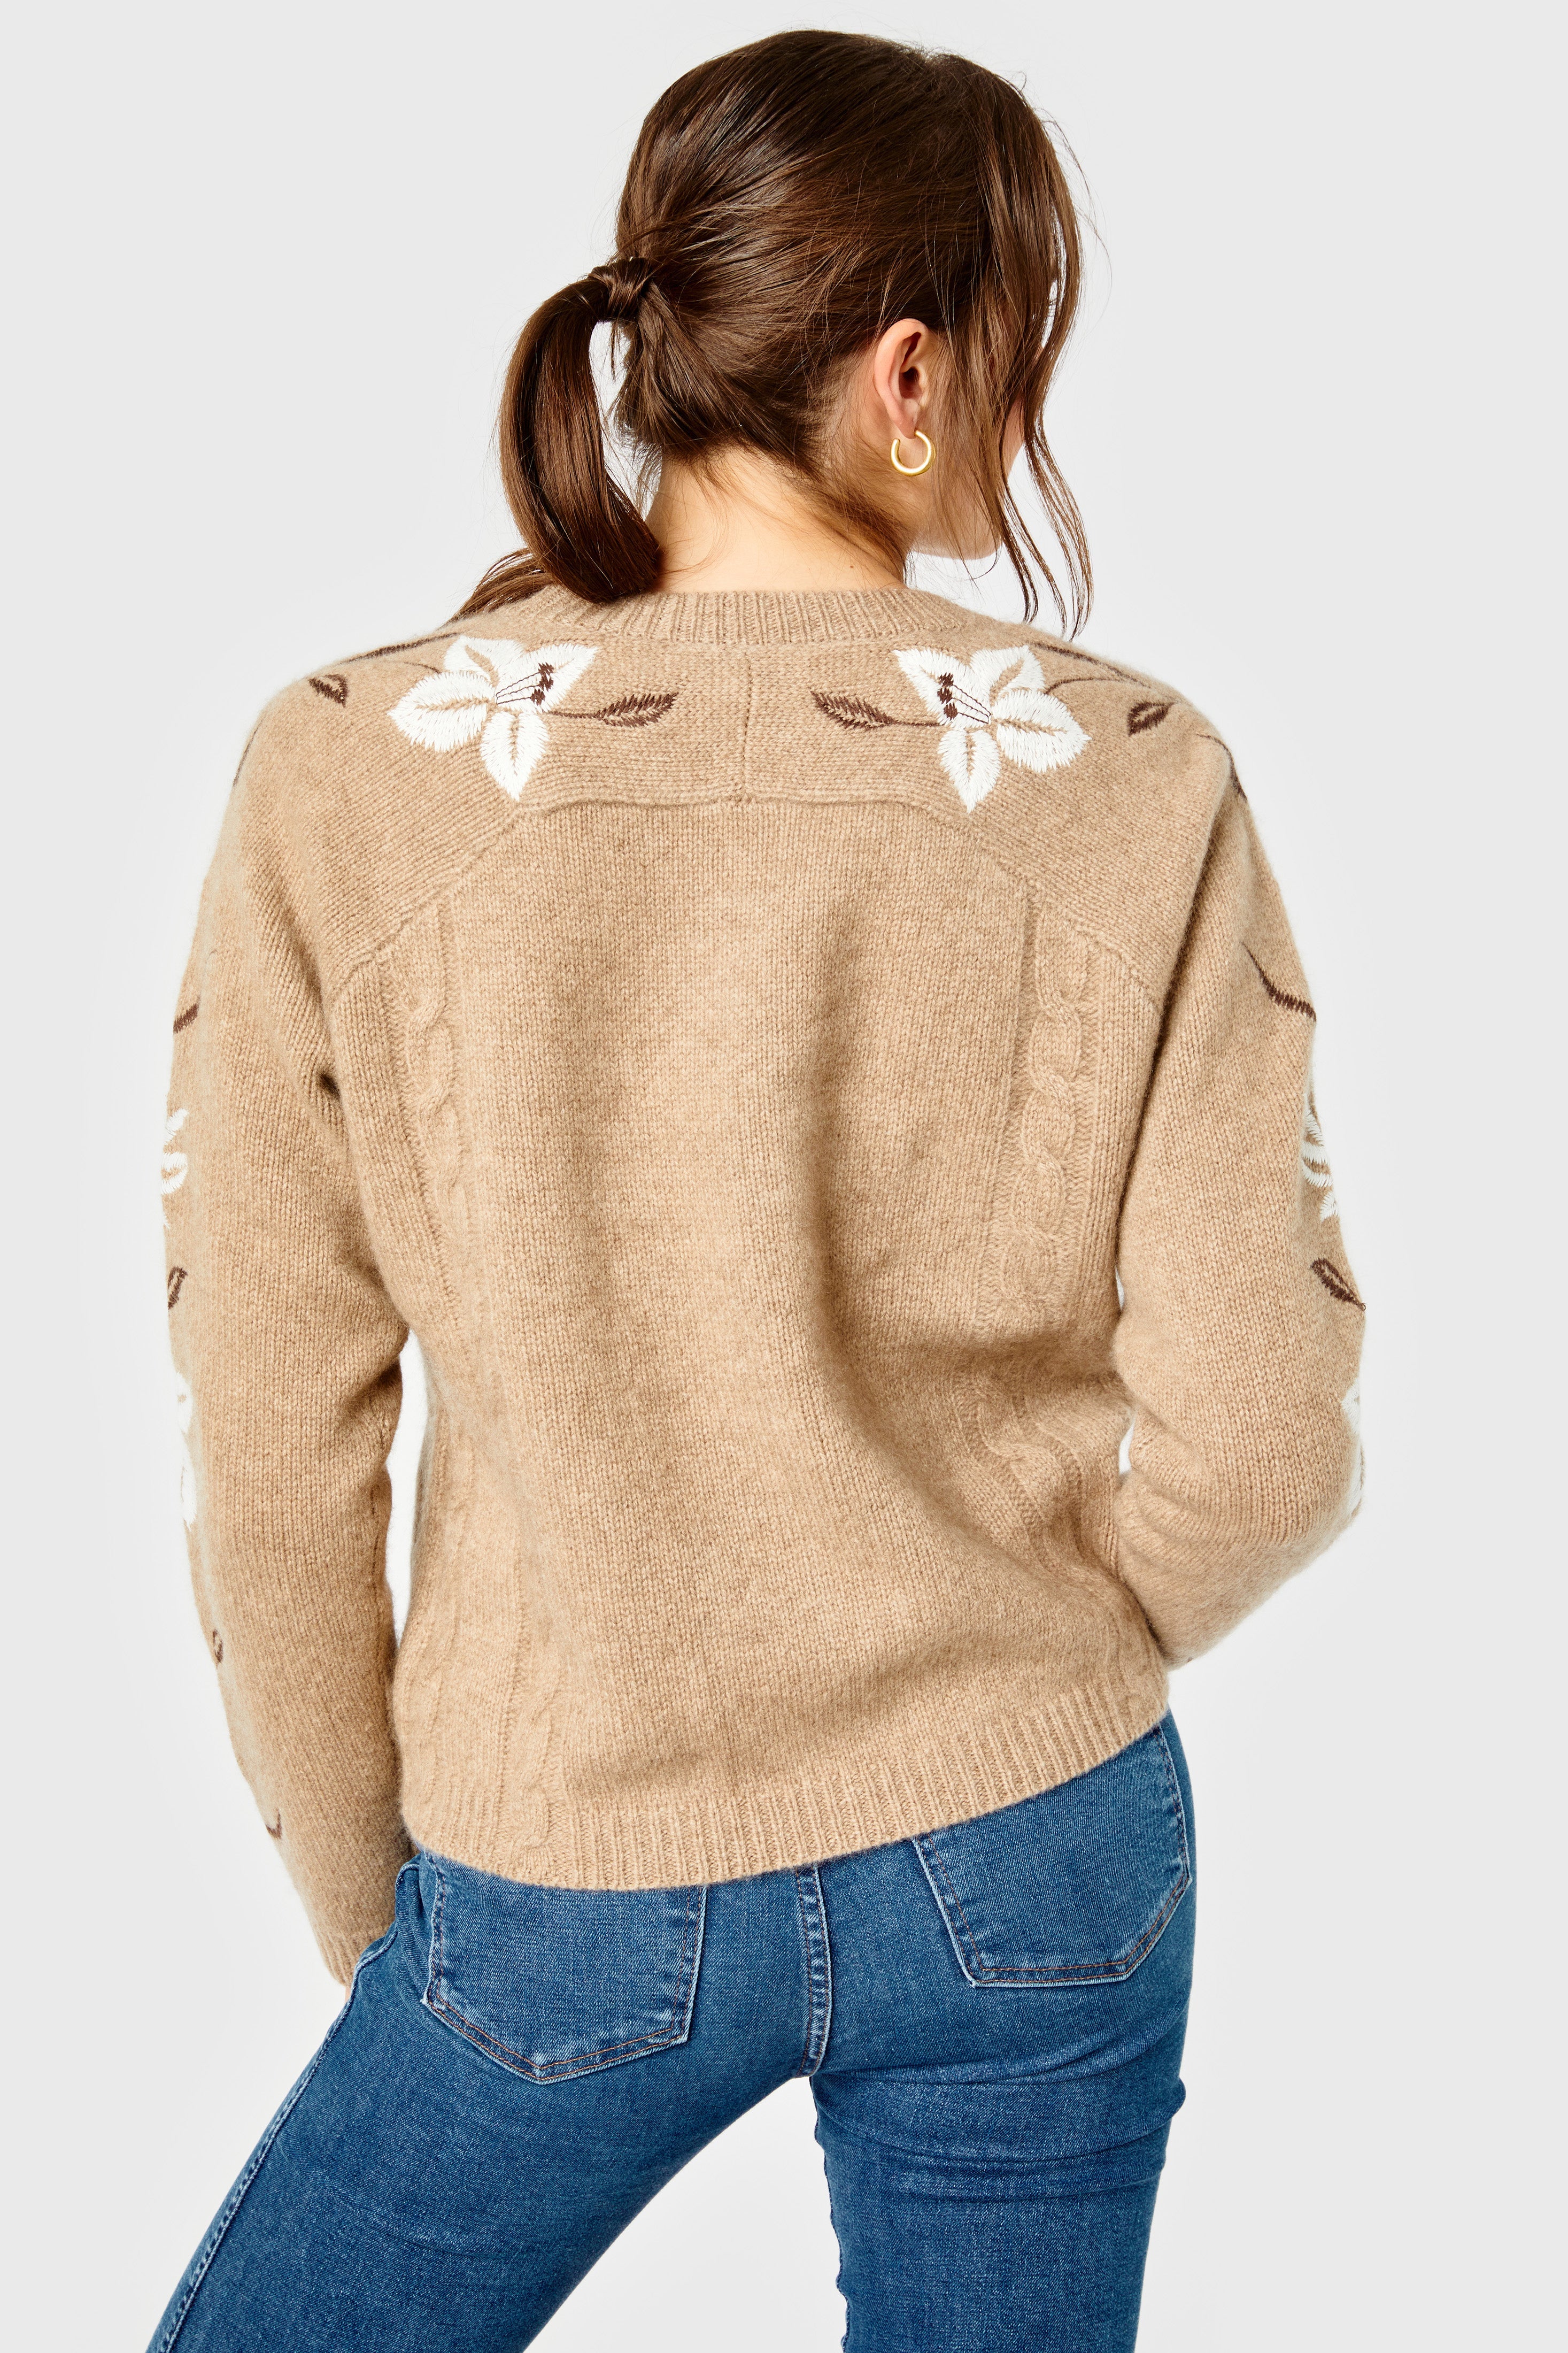 Quinn Sweater-Cashmere Embroidered-Jute by Cartolina